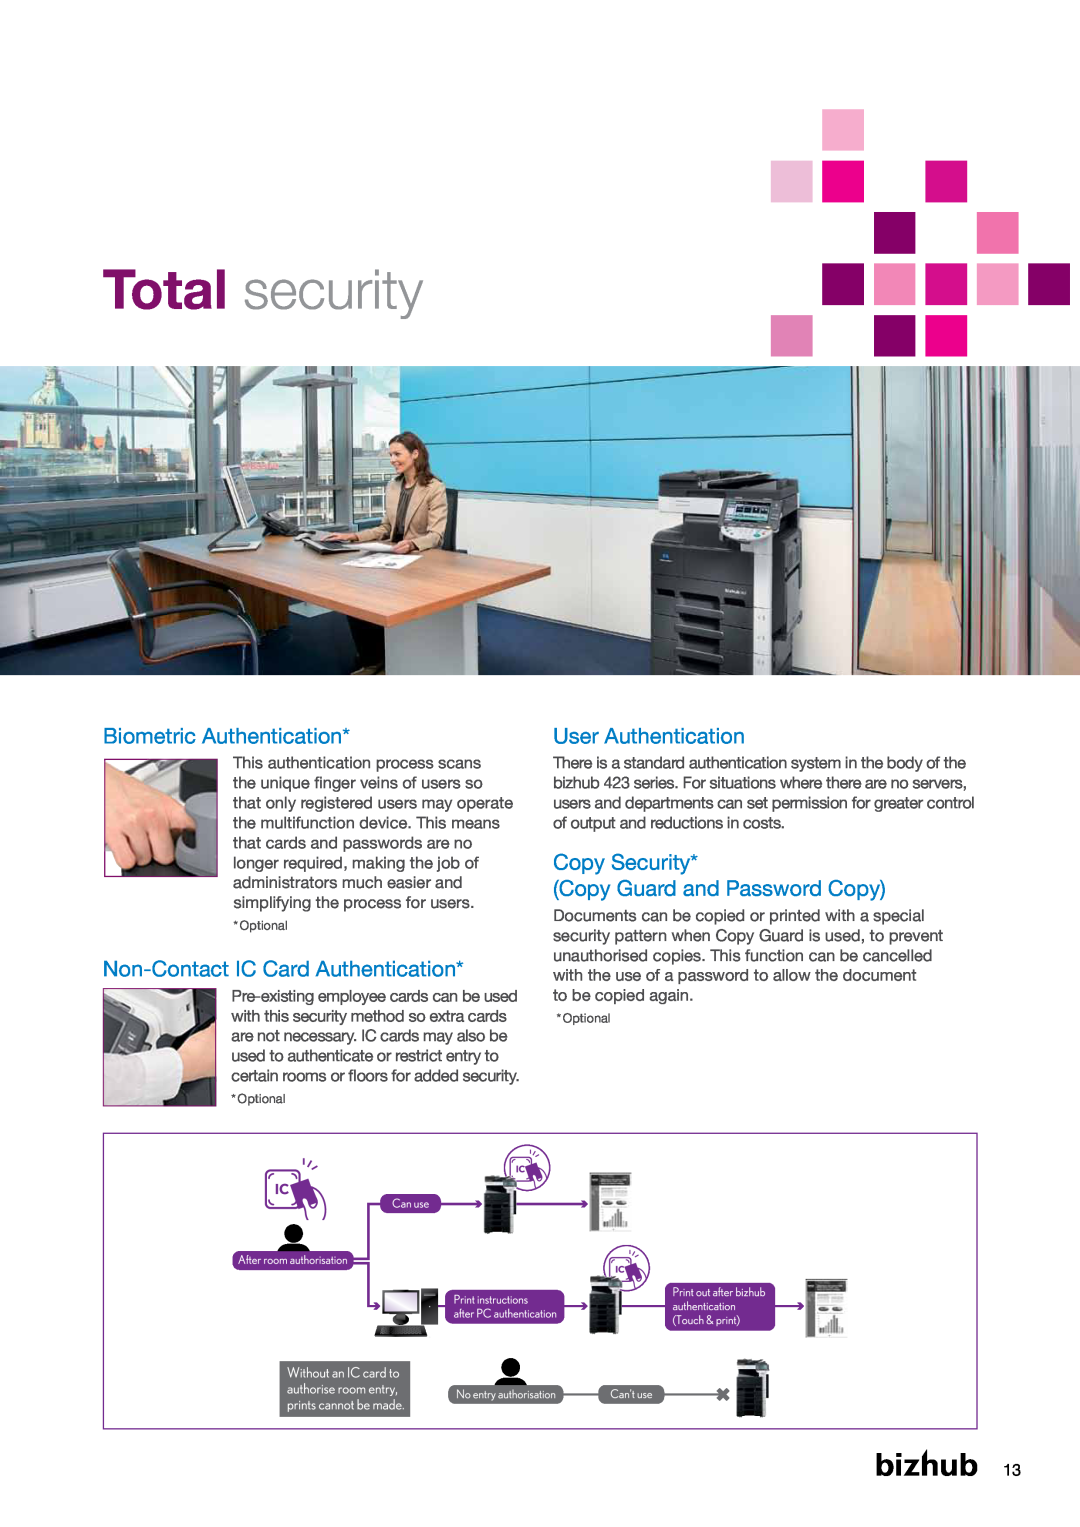 Konica Minolta 223, 283 Total security, Biometric Authentication, Non-Contact IC Card Authentication, User Authentication 